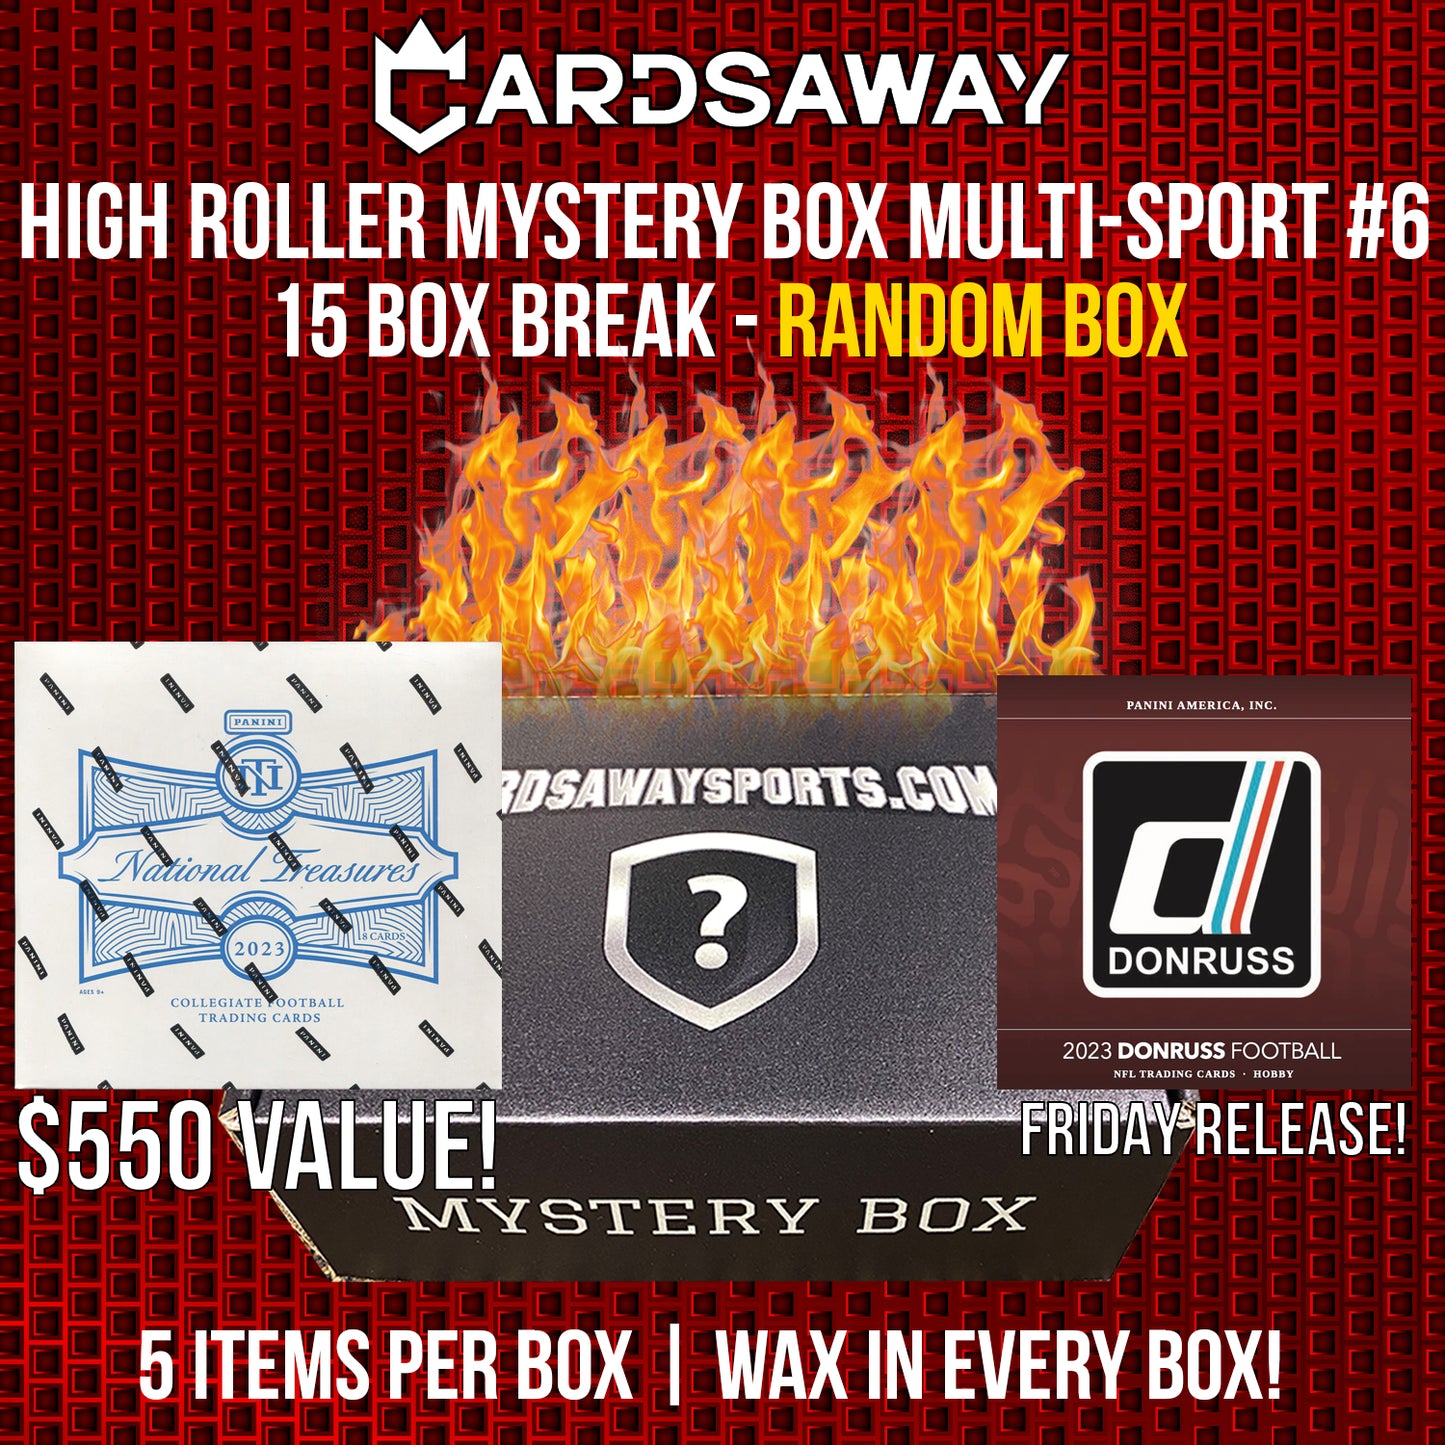 HIGH ROLLER MYSTERY BOX MULTI-SPORT  - 15 Box Break - RANDOM BOX #6 [EXCLUDED FROM DISCOUNTS/GIFT CARDS]